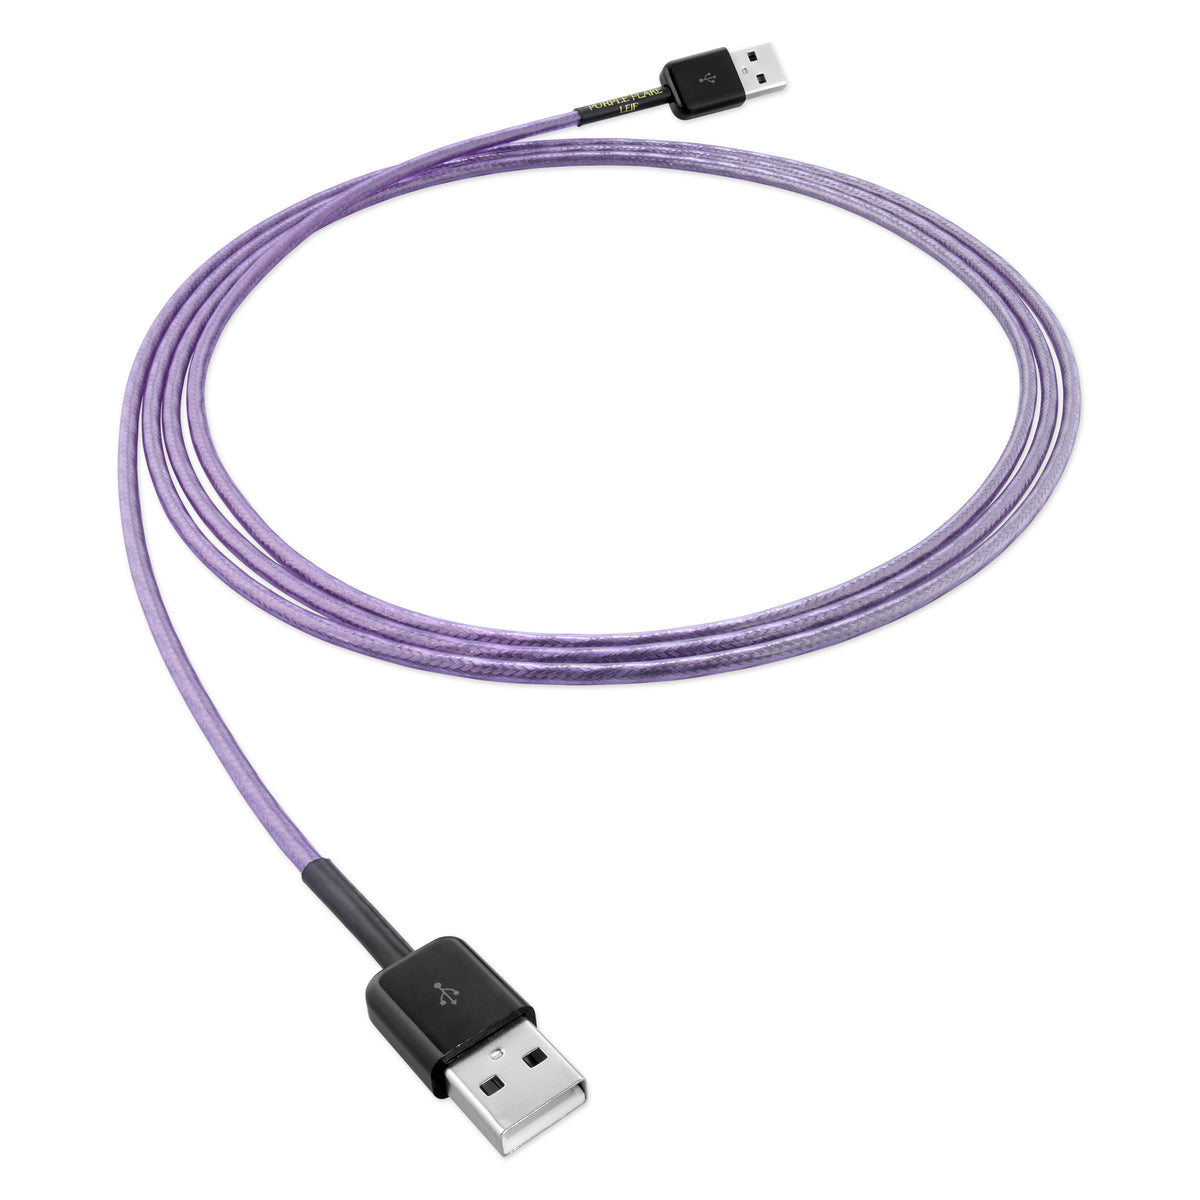 Norse FREY 2 USB C Cable